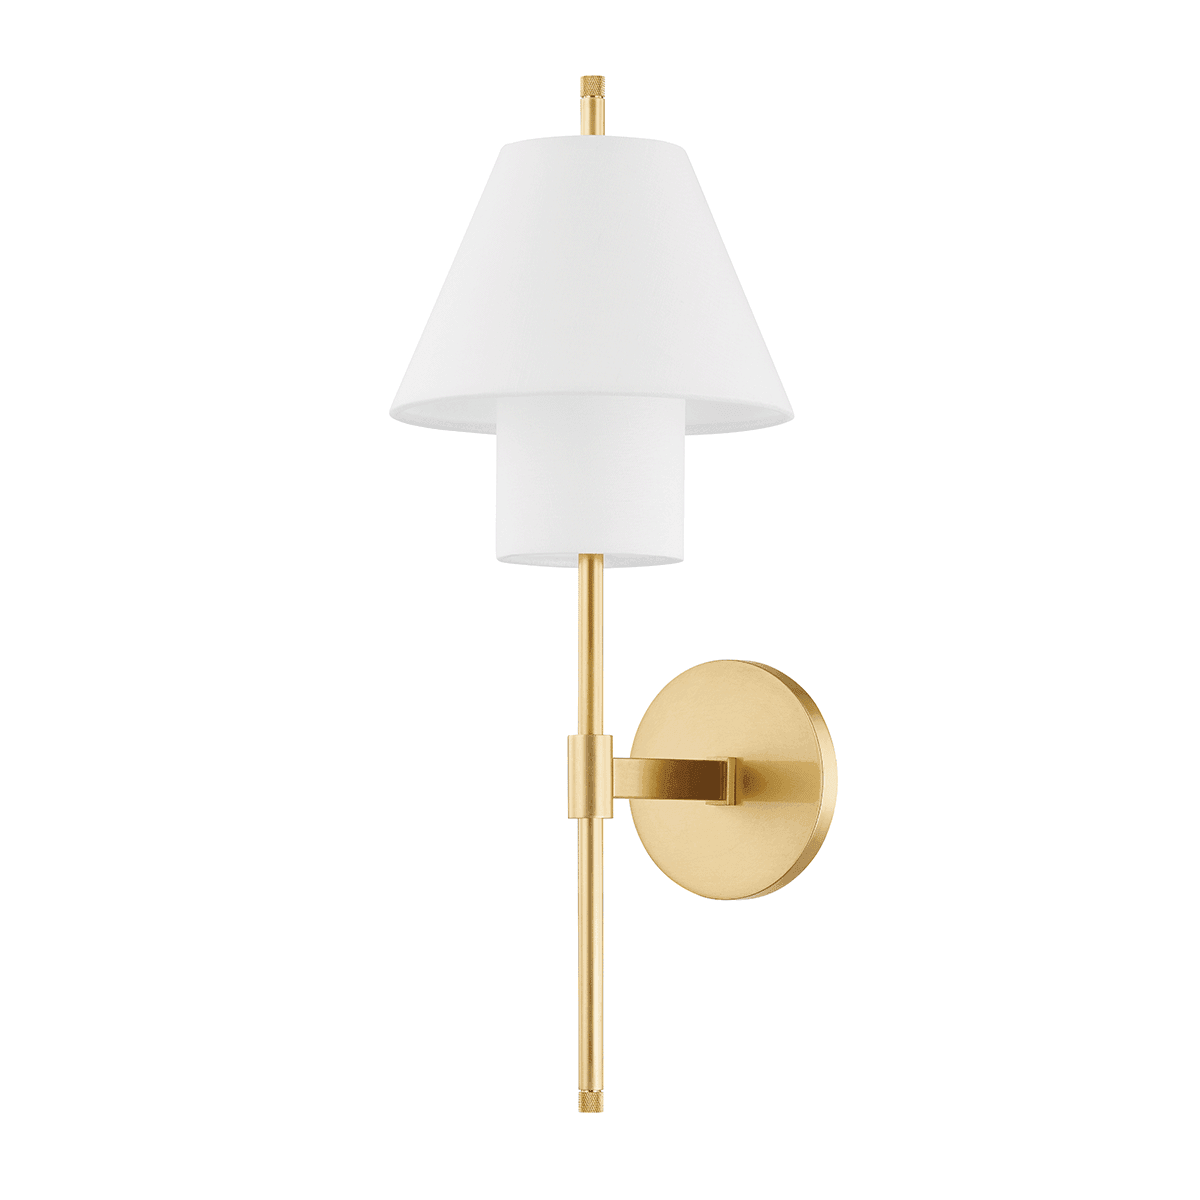 Hudson Valley Lighting - Glenmoore Wall Sconce - PI1899101-AGB | Montreal Lighting & Hardware